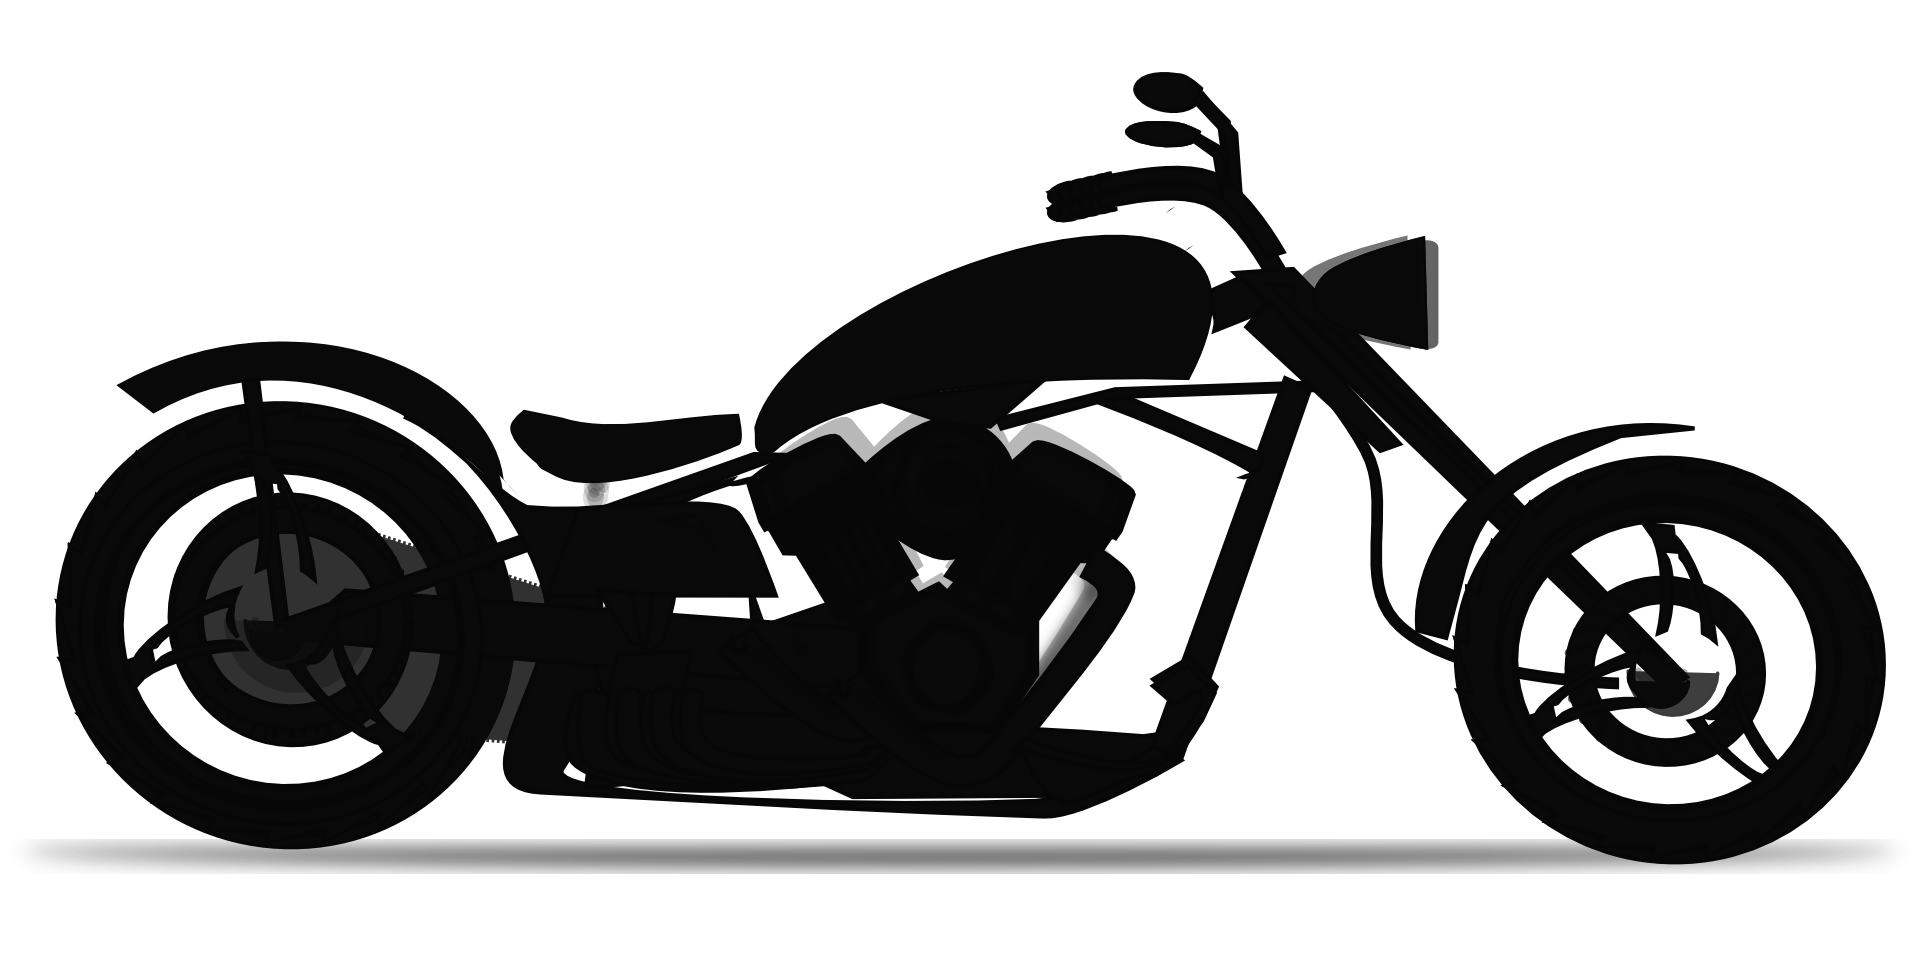 Download Motorcycle clipart vector, Motorcycle vector Transparent FREE for download on WebStockReview 2020